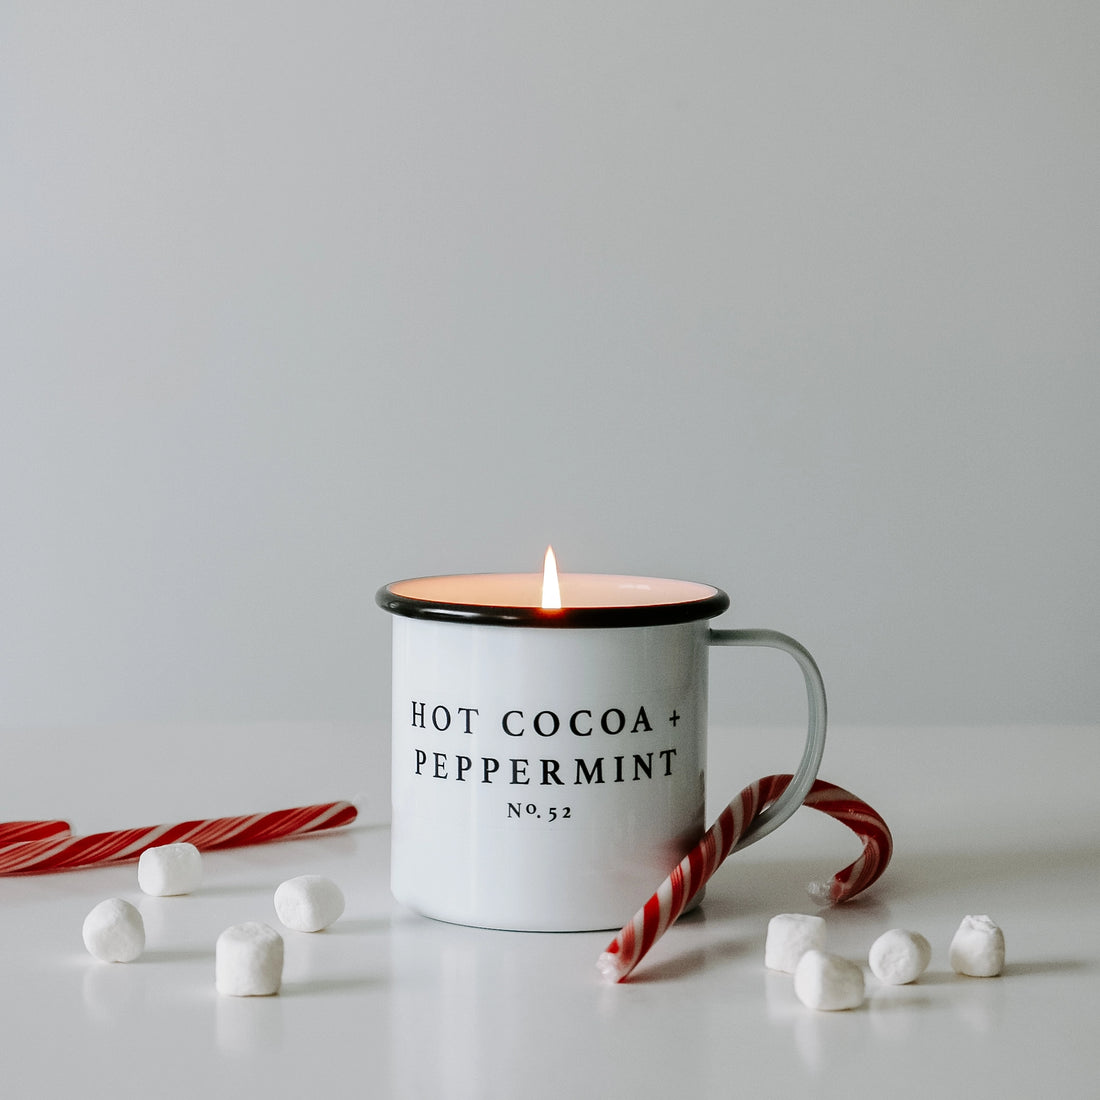 Hot Cocoa and Peppermint Candle - Coffee Mug Candle